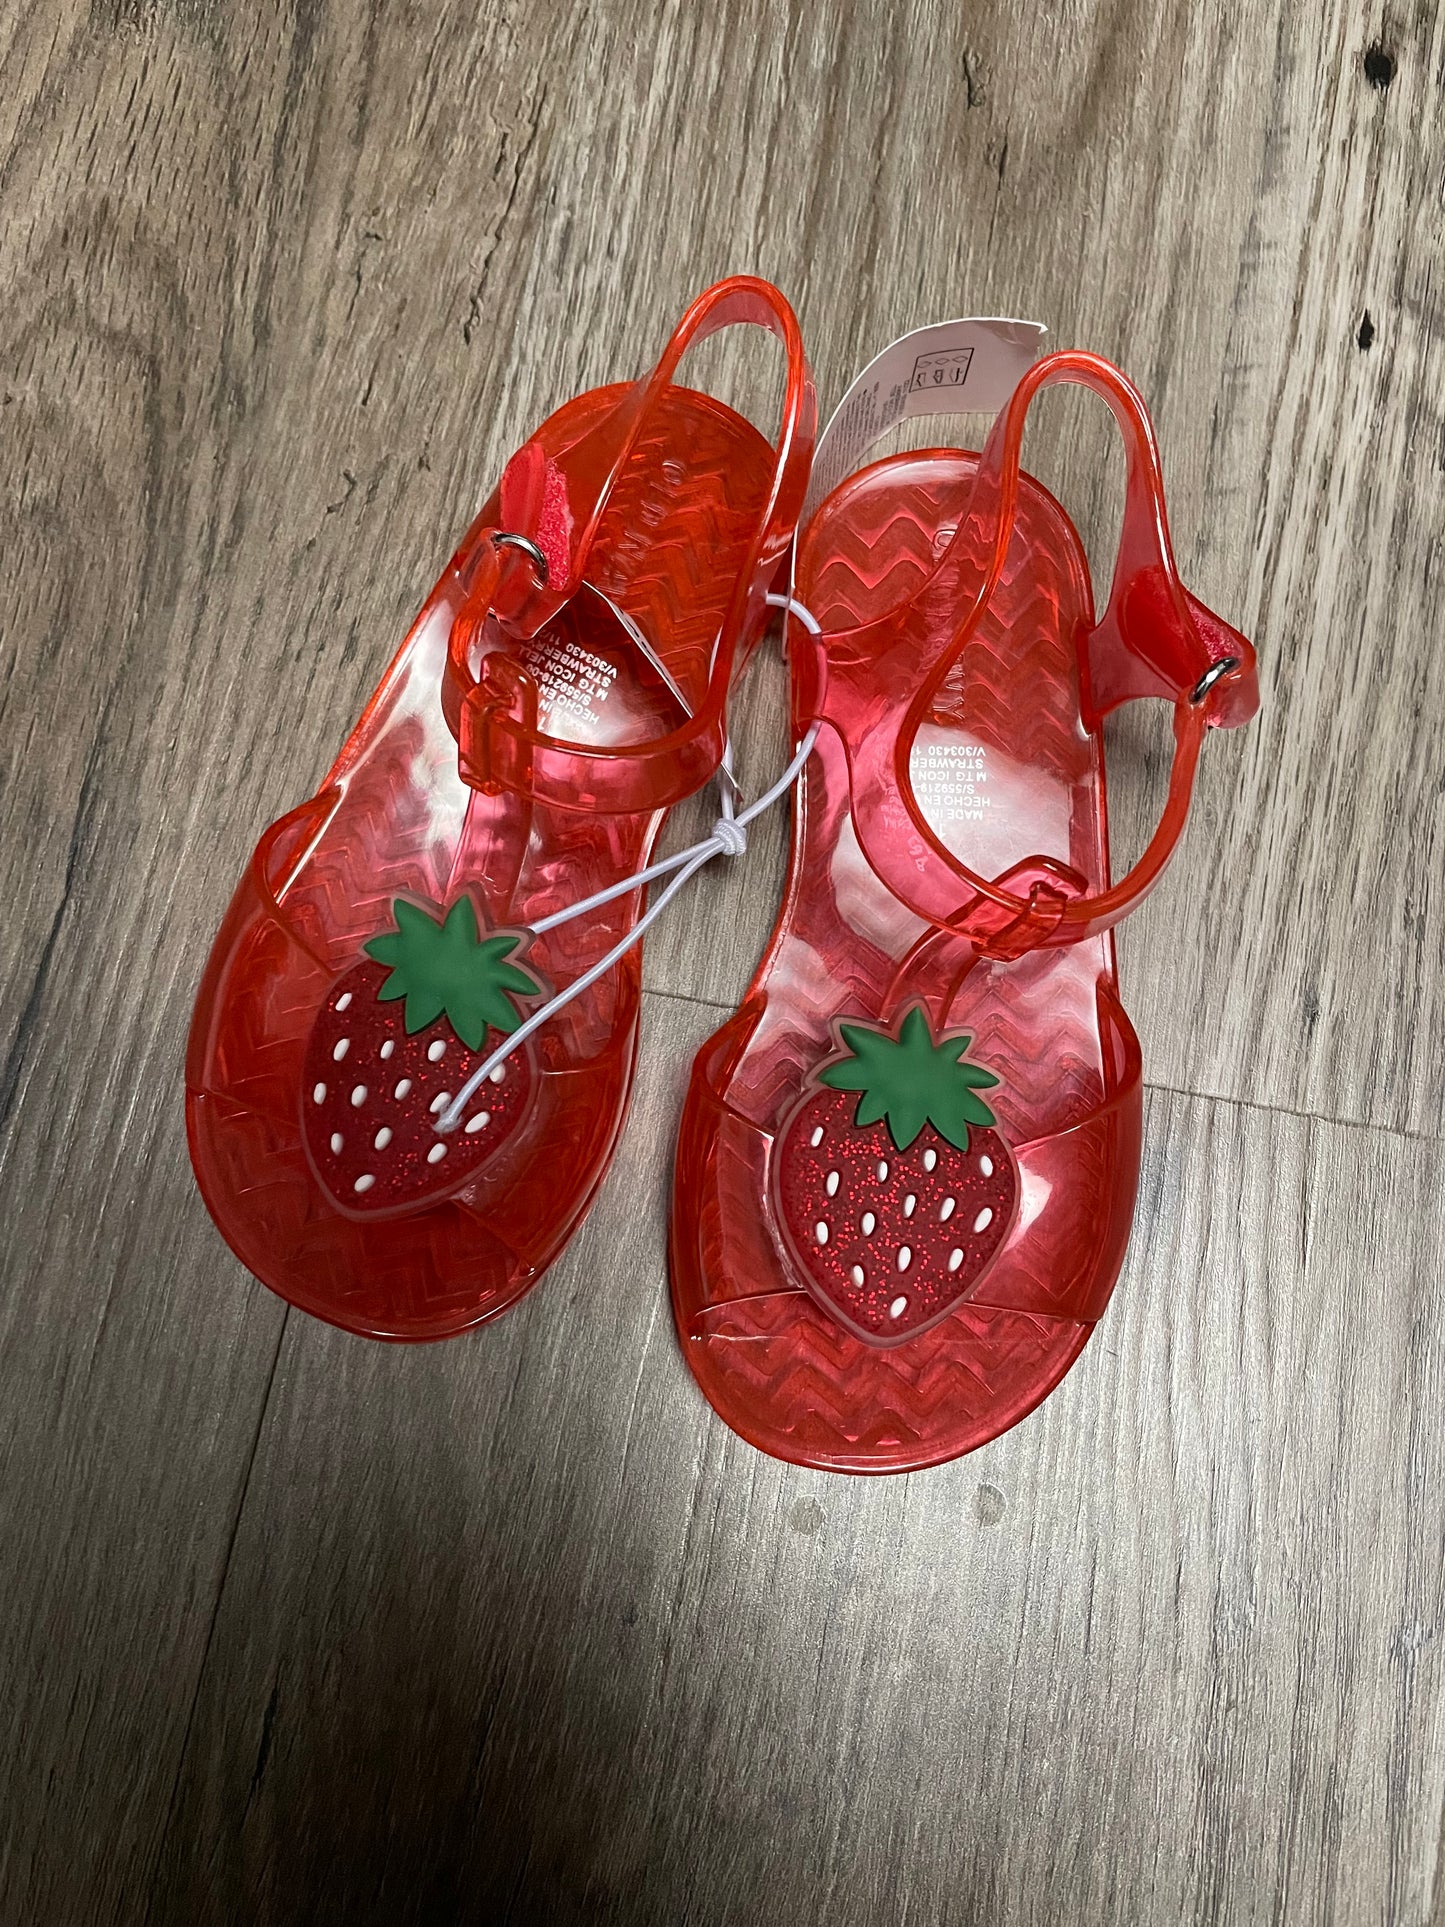 New toddler girl size 8 Jelly shoes. Old navy. Strawberry